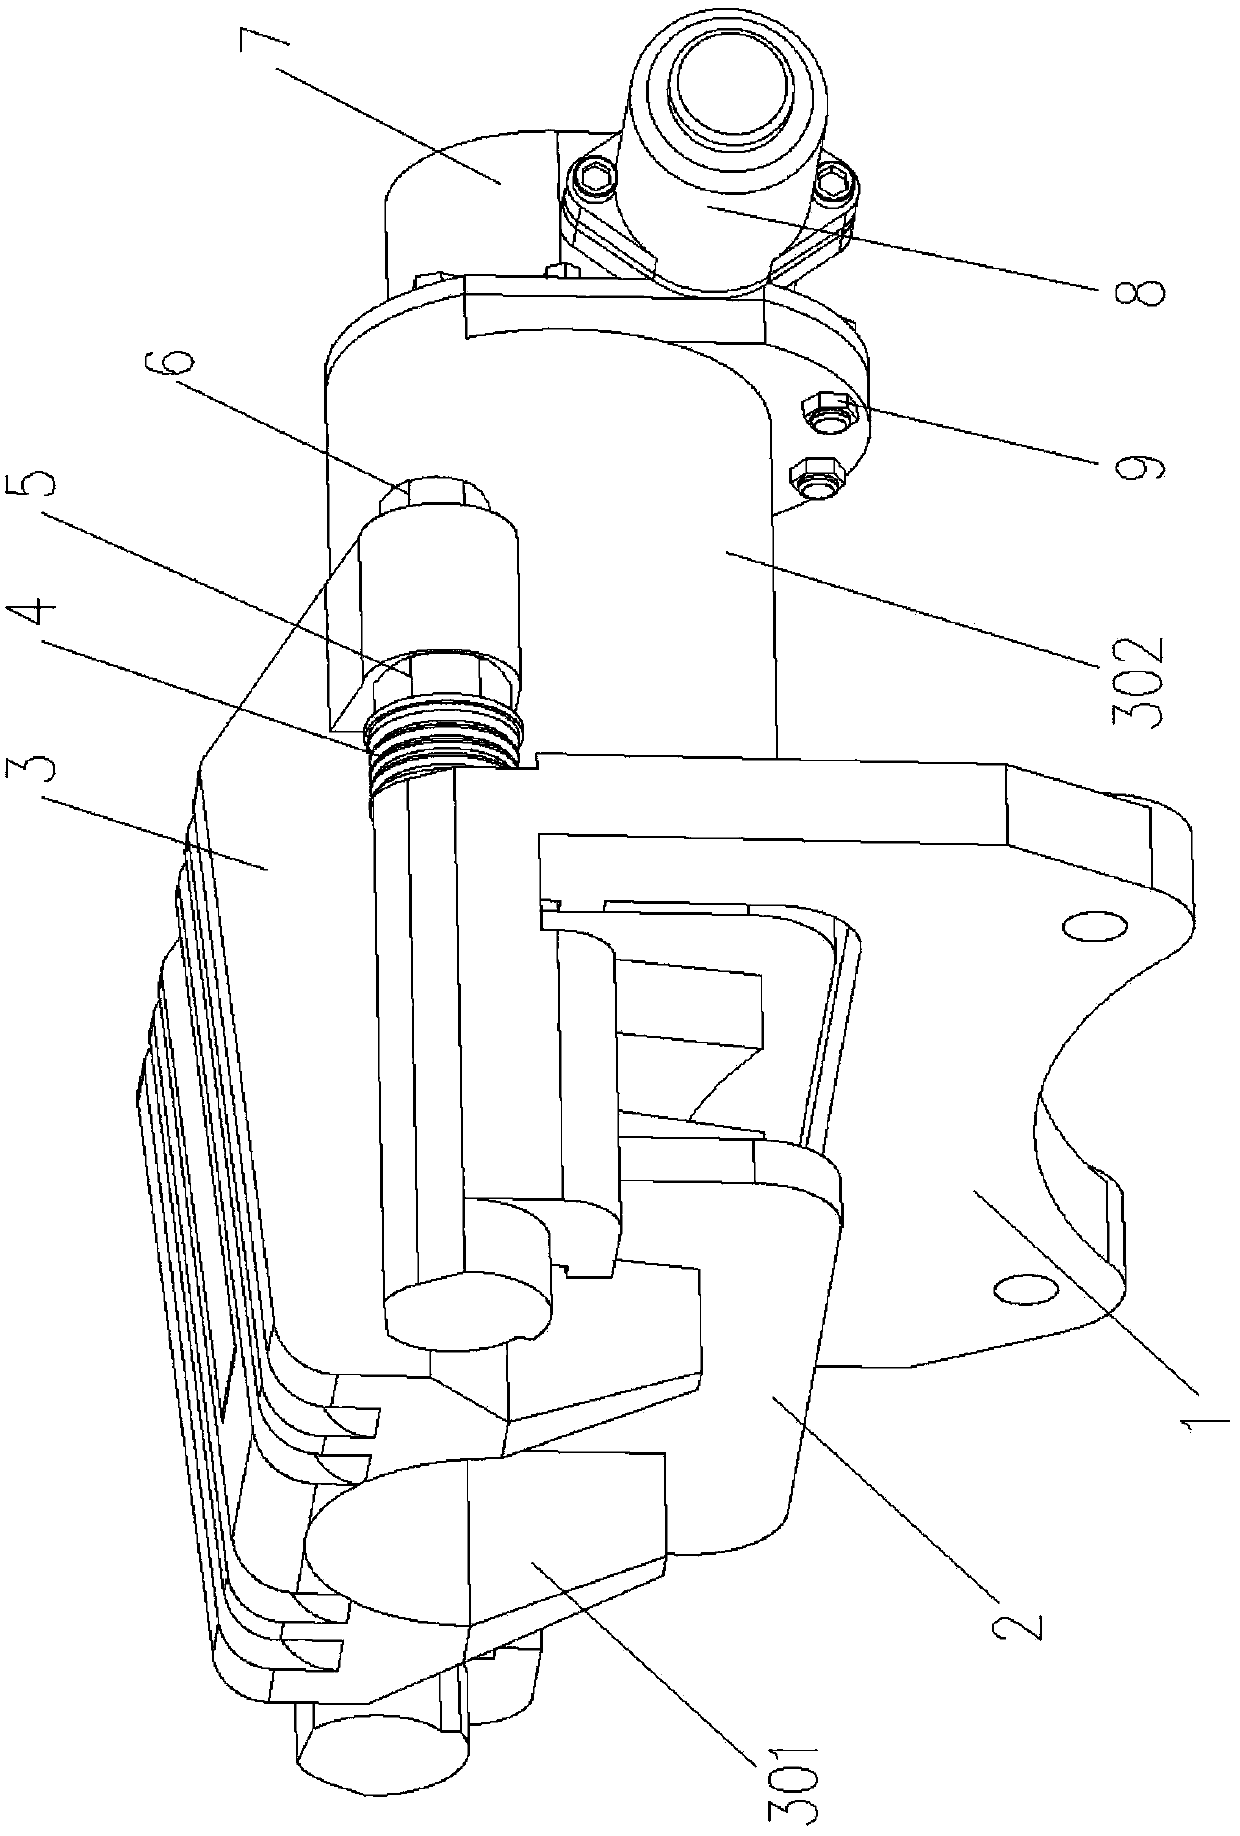 Worm gear, worm, ball and wedge-disc type electronic parking brake